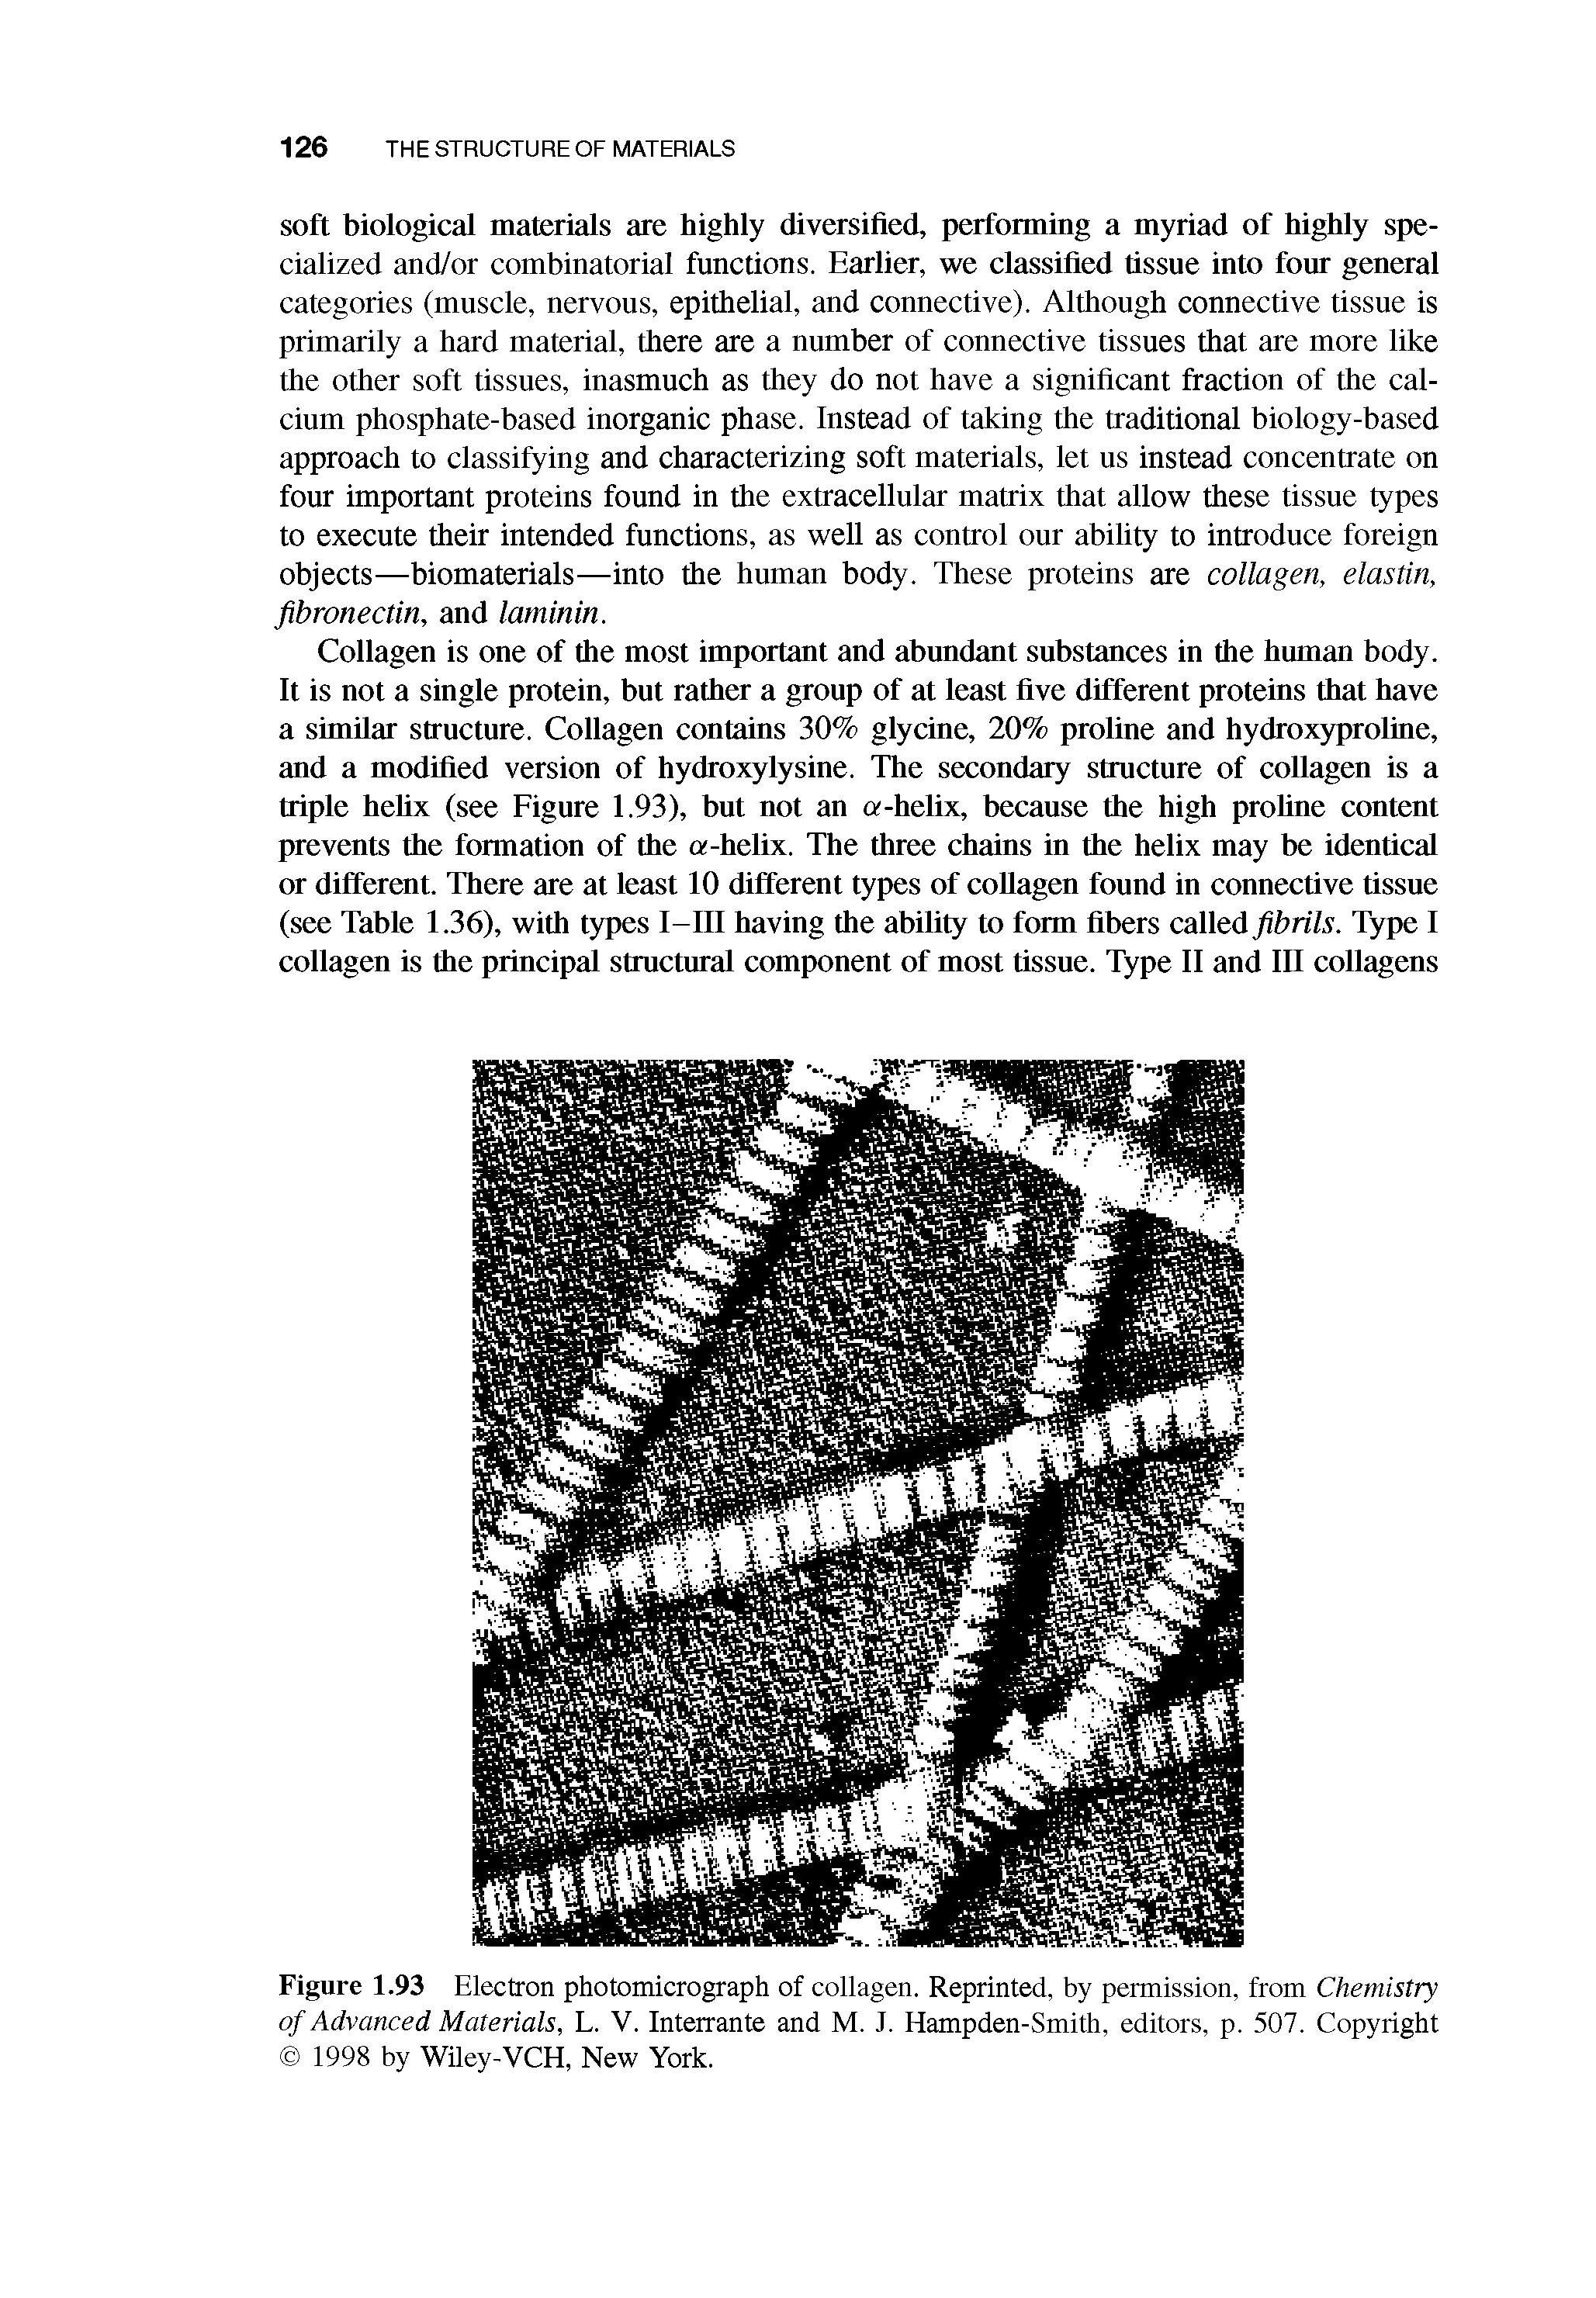 Figure 1.93 Electron photomicrograph of collagen. Reprinted, by permission, from Chemistry of Advanced Materials, L. V. Interrante and M. J. Hampden-Smith, editors, p. 507. Copyright 1998 by Wiley-VCH, New York.